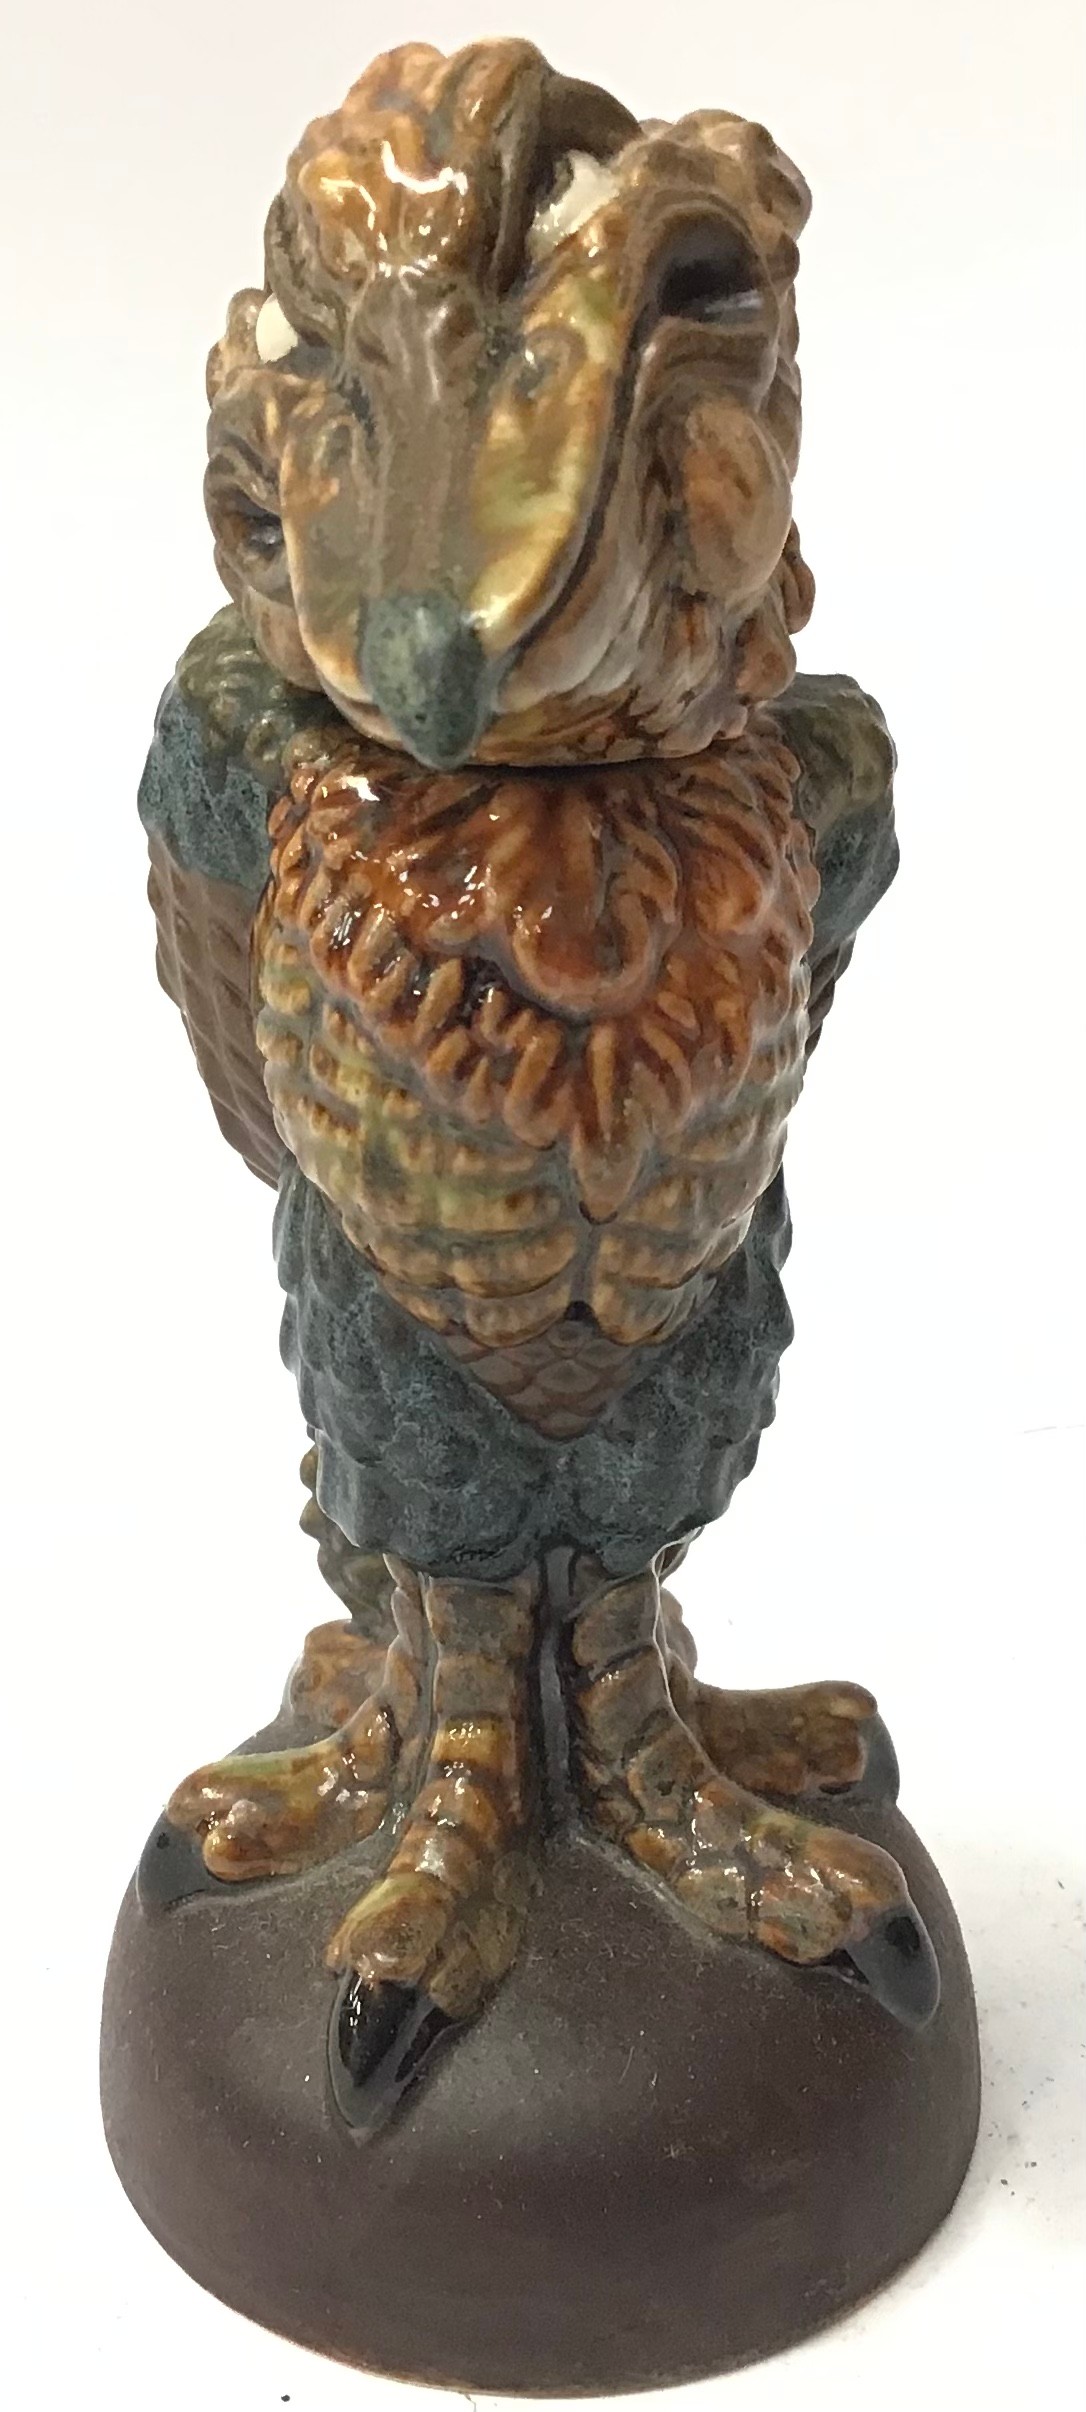 Andrew Hull (Burslem) grotesque bird figure with removable head fully marked & signed to base 5.5"